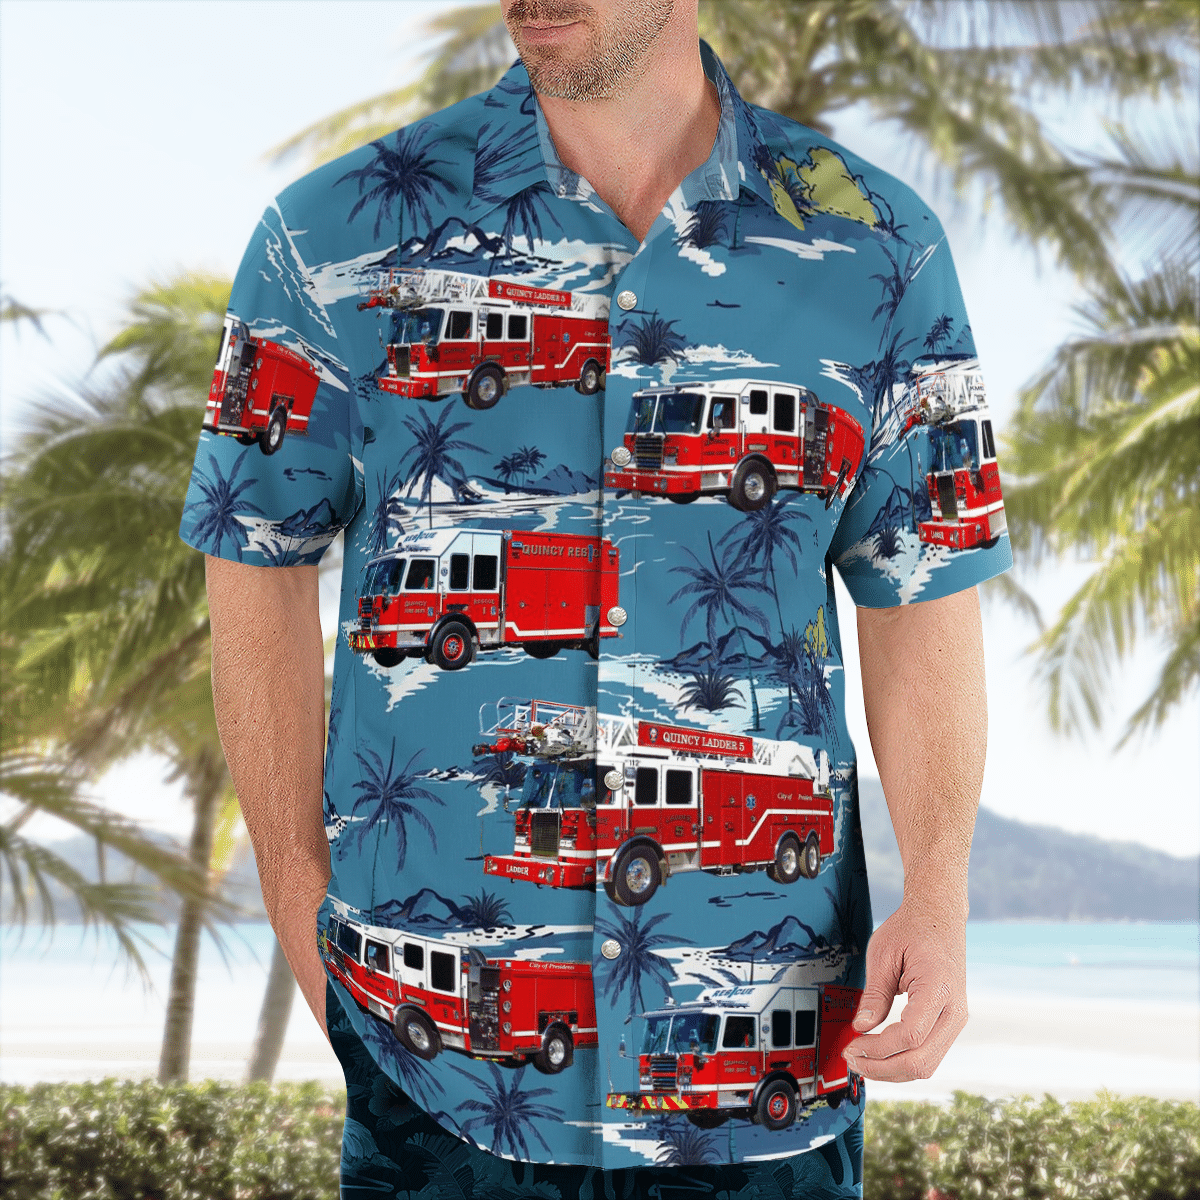 There are several styles of beach and Hawaiian shorts and tops to choose from 73